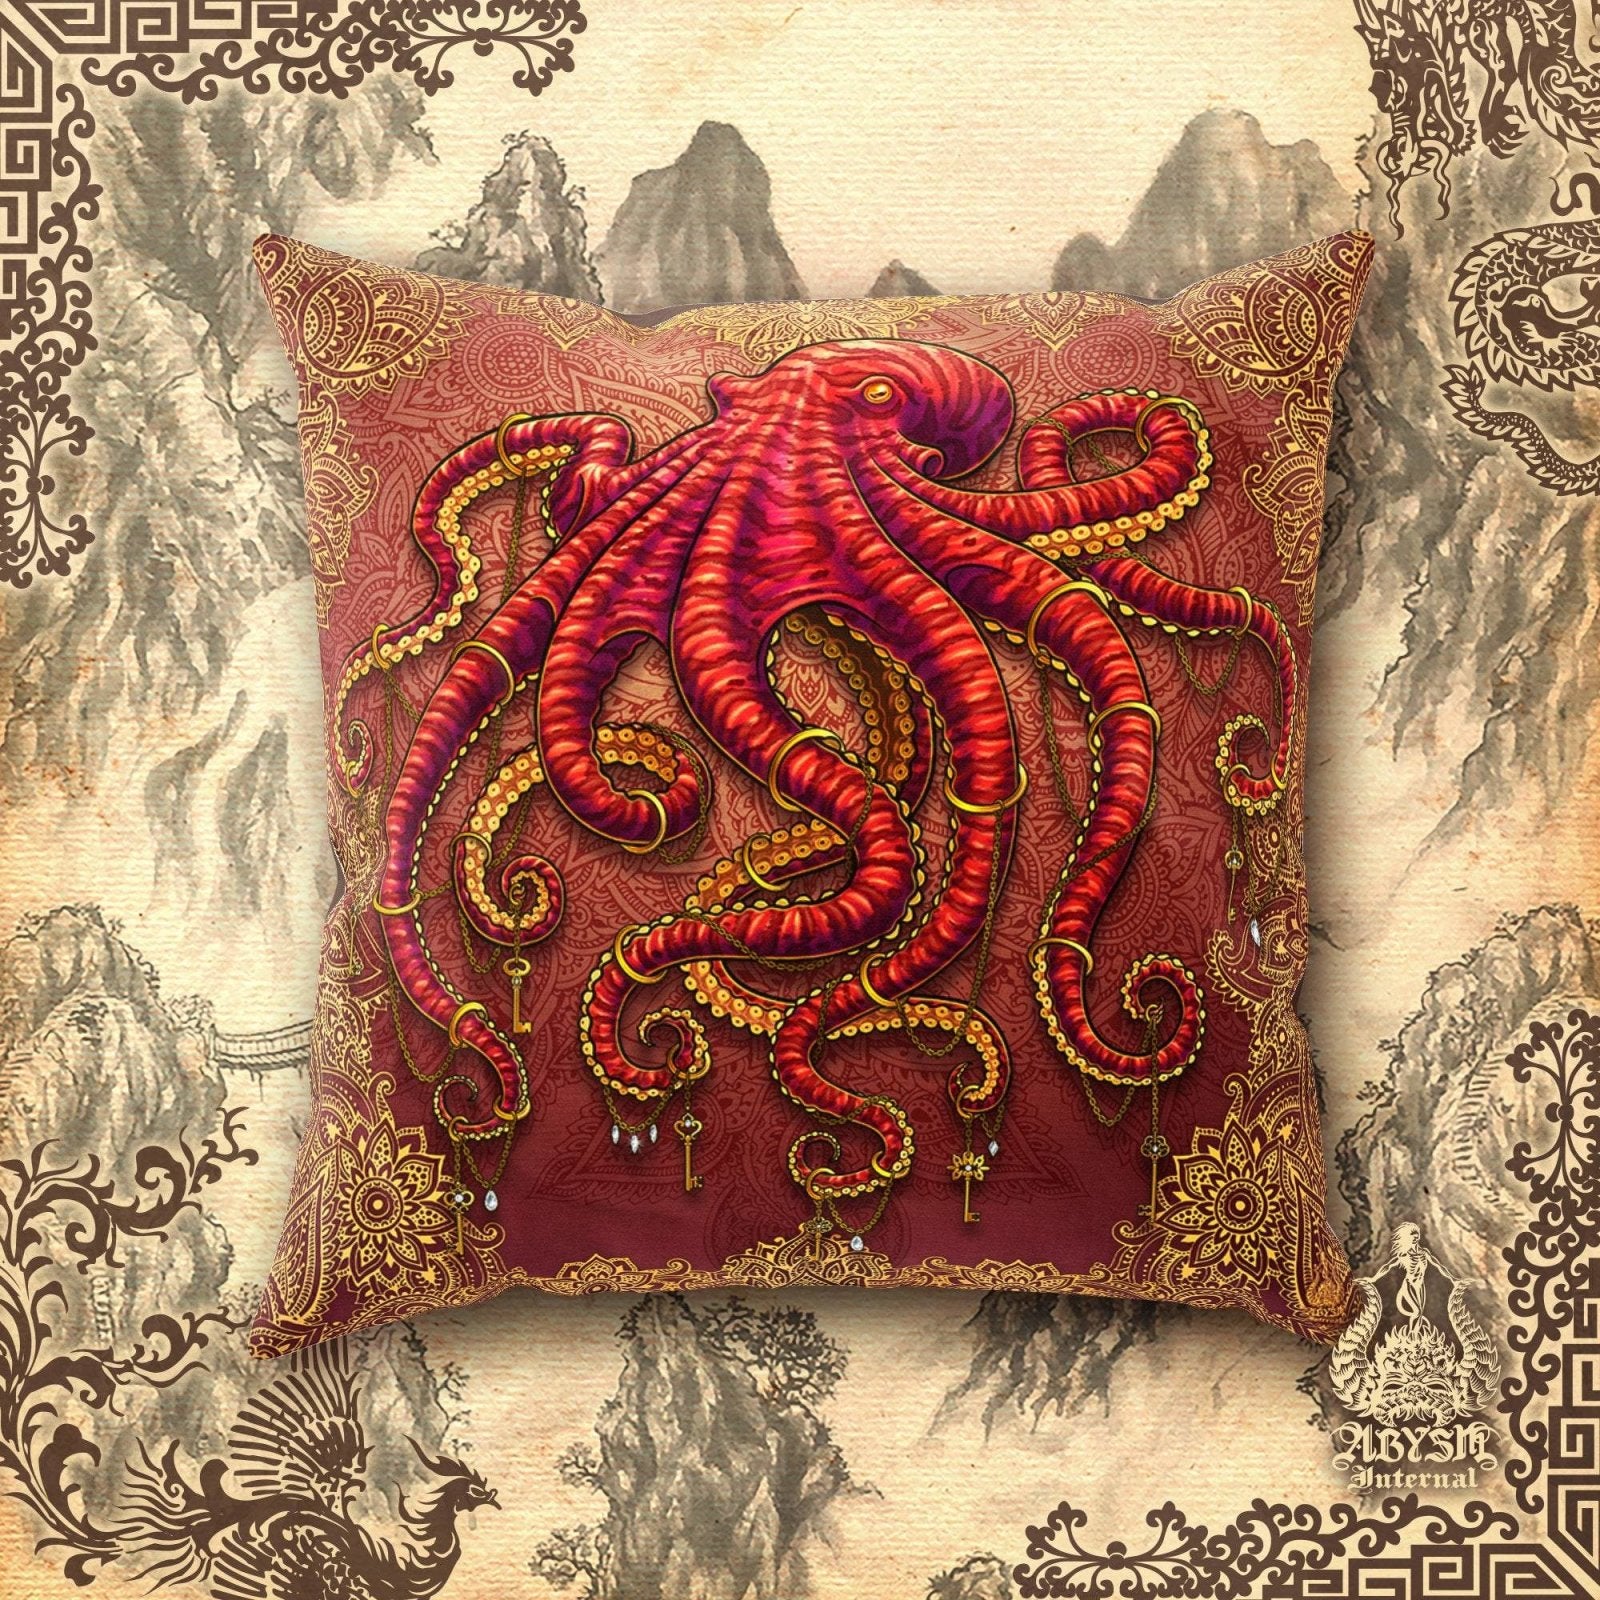 Boho Throw Pillow, Decorative Accent Cushion, Beach Room Decor, Indie and Eclectic Design, Funky Home - Octopus and Mandalas - Abysm Internal